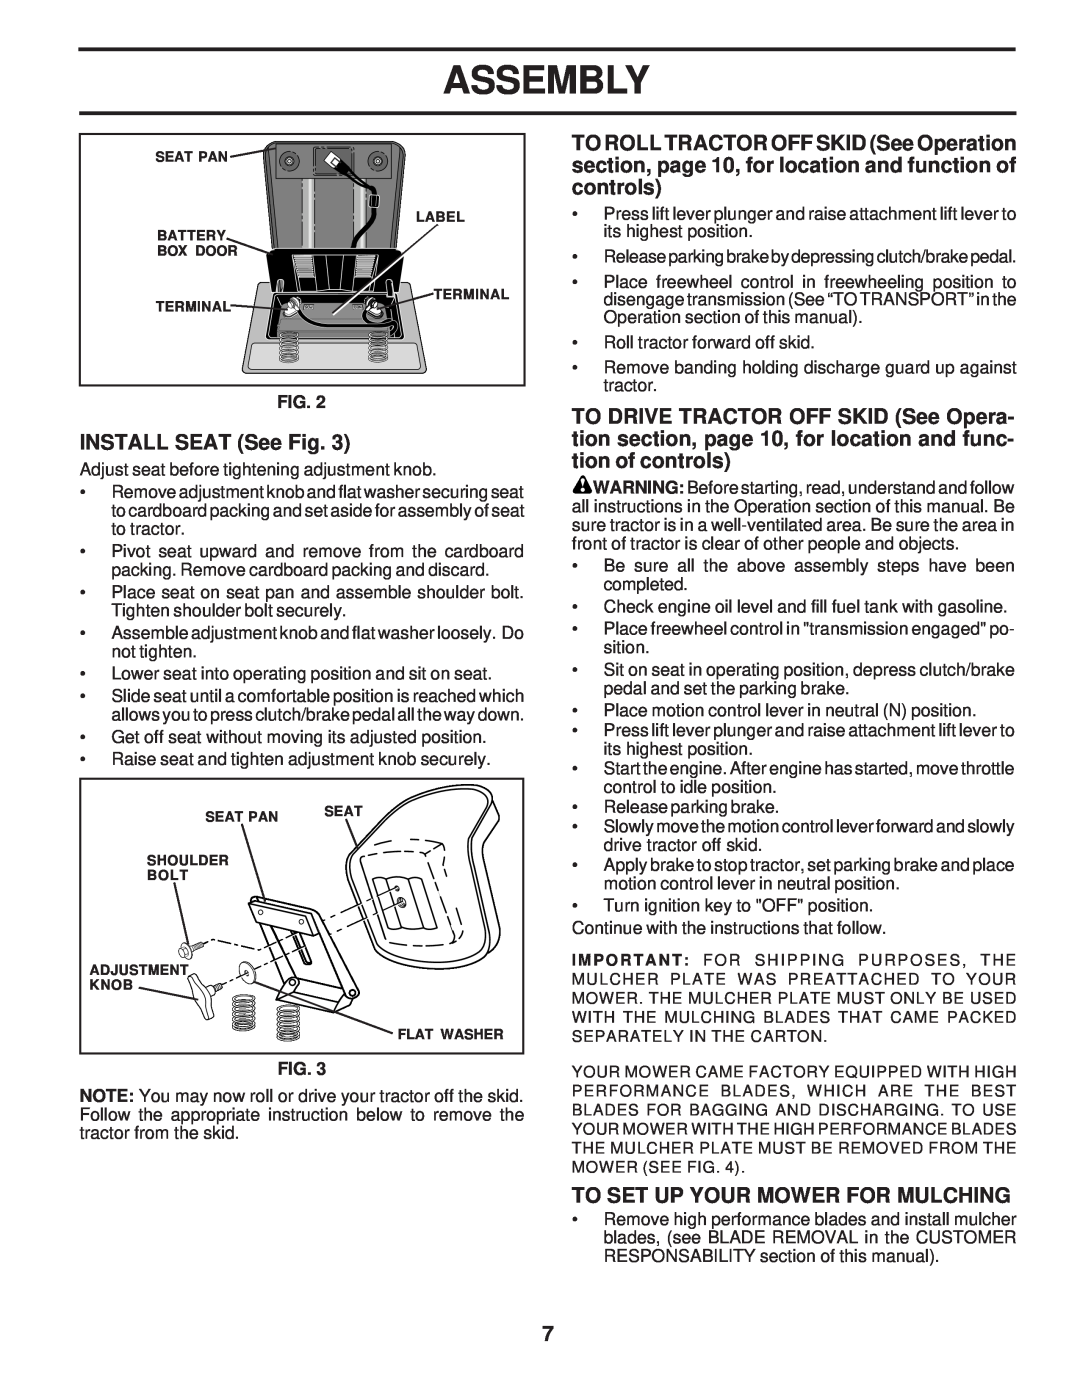 Poulan PR20H42STA INSTALL SEAT See Fig, To Set Up Your Mower For Mulching, Assembly, Seat Pan, Shoulder, Bolt, Adjustment 